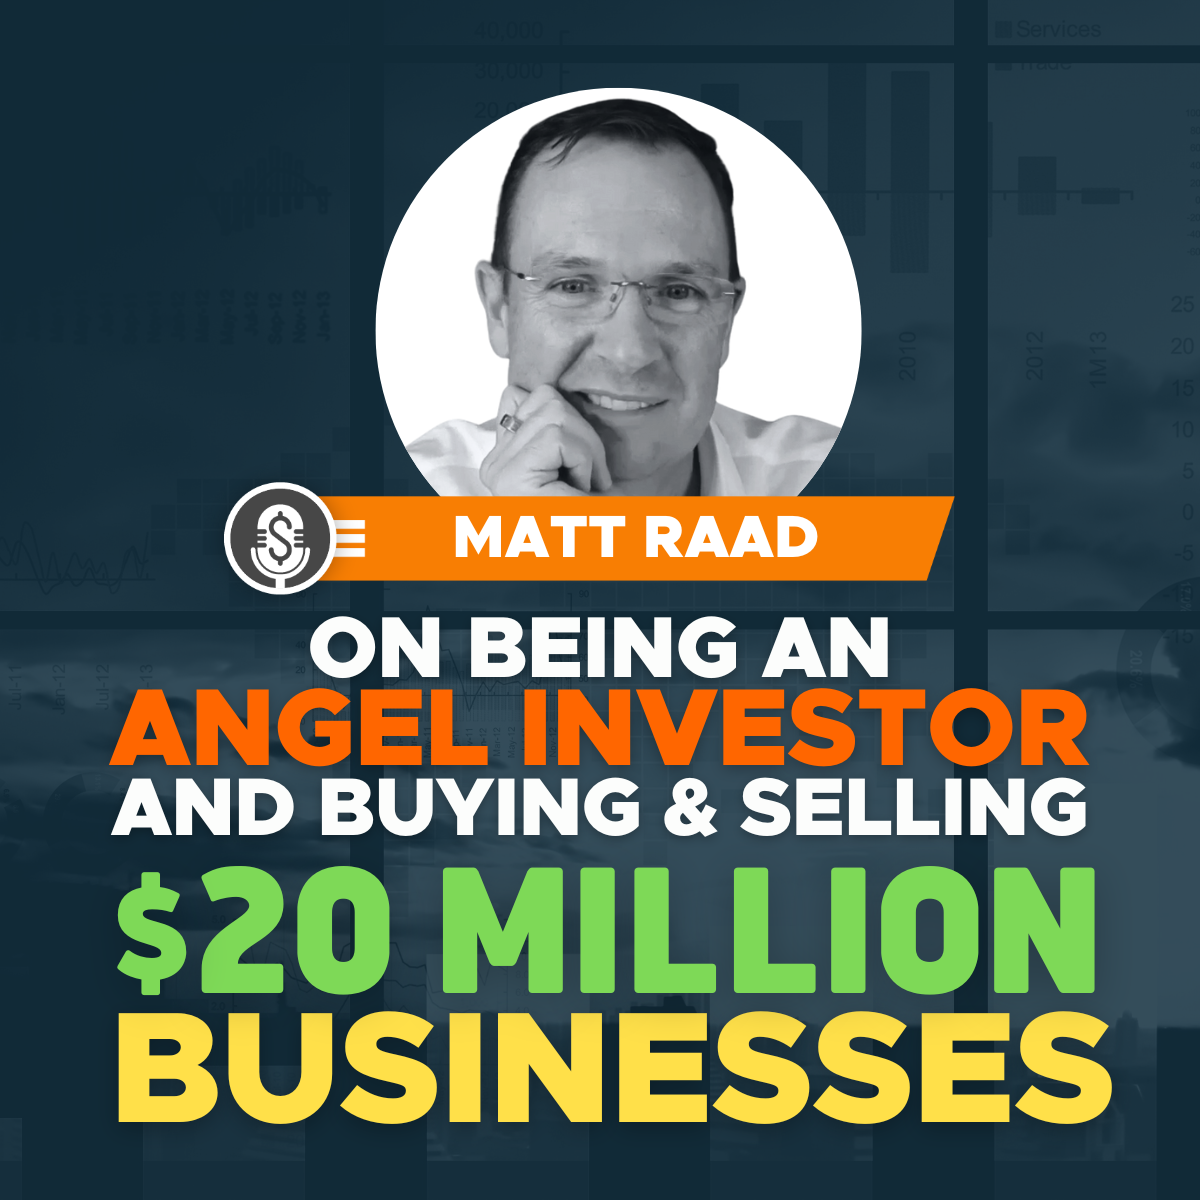 Matt Raad on being an Angel Investor and buying and selling $20 million businesses